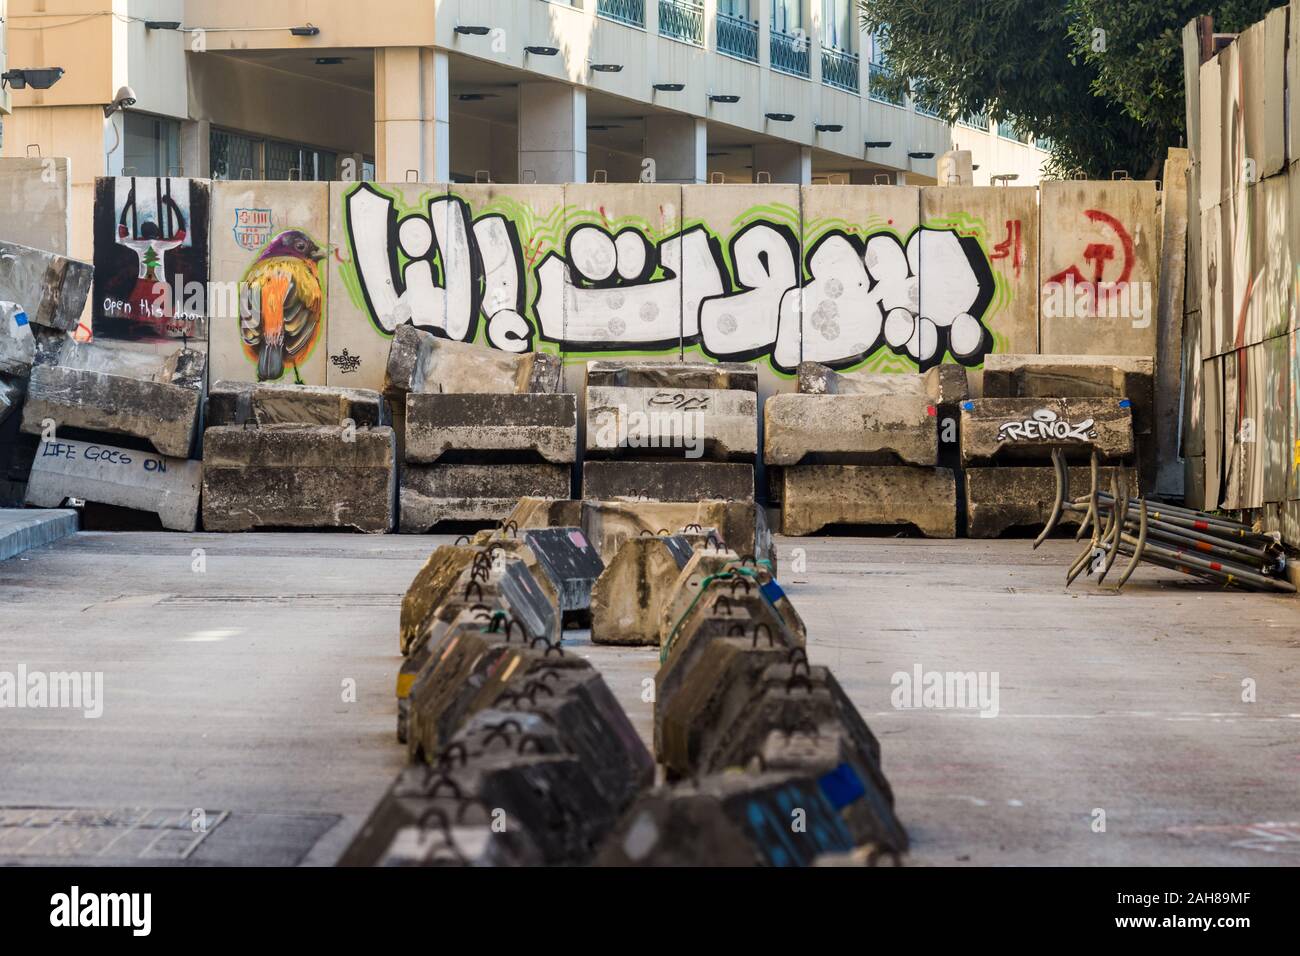 Graffiti that says 'Beirut is Ours' written on a barricade during the 2019 Lebanon protests, Beirut, Lebanon Stock Photo